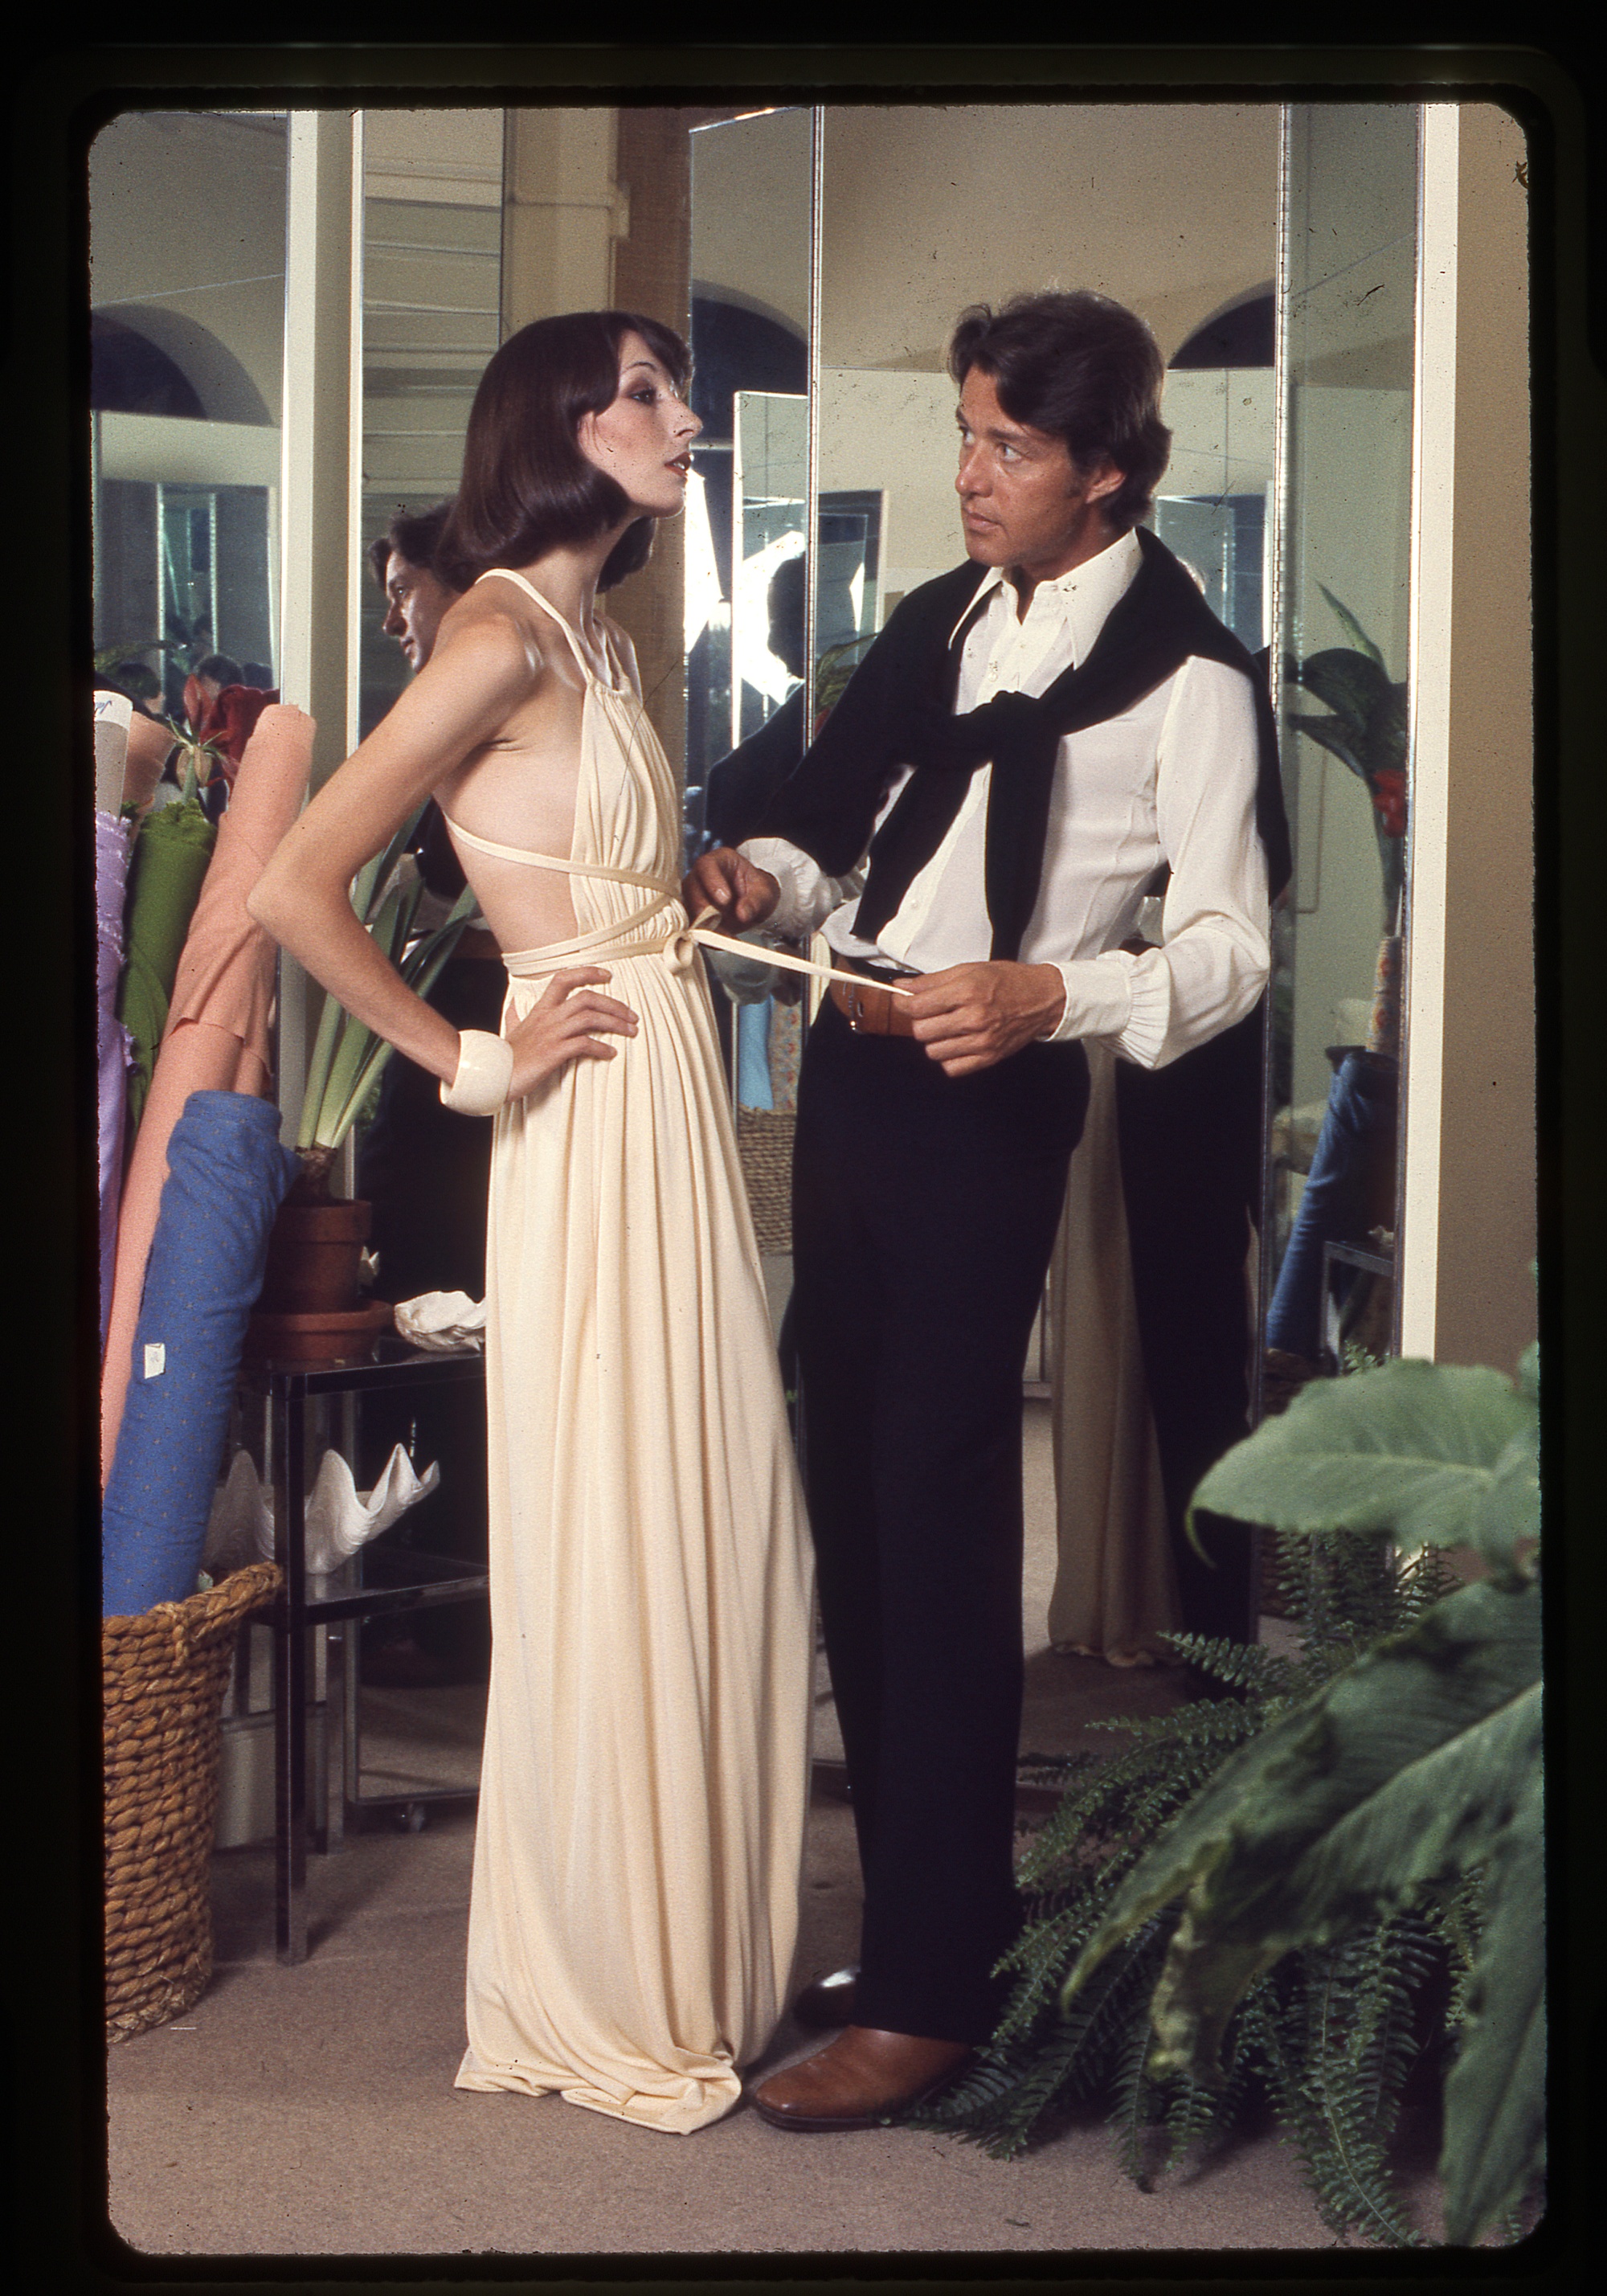 Halston doing a fitting with a model at his original Manhattan atelier ©Berry Berenson Perkins_Halston and Angelica Huston.jpg